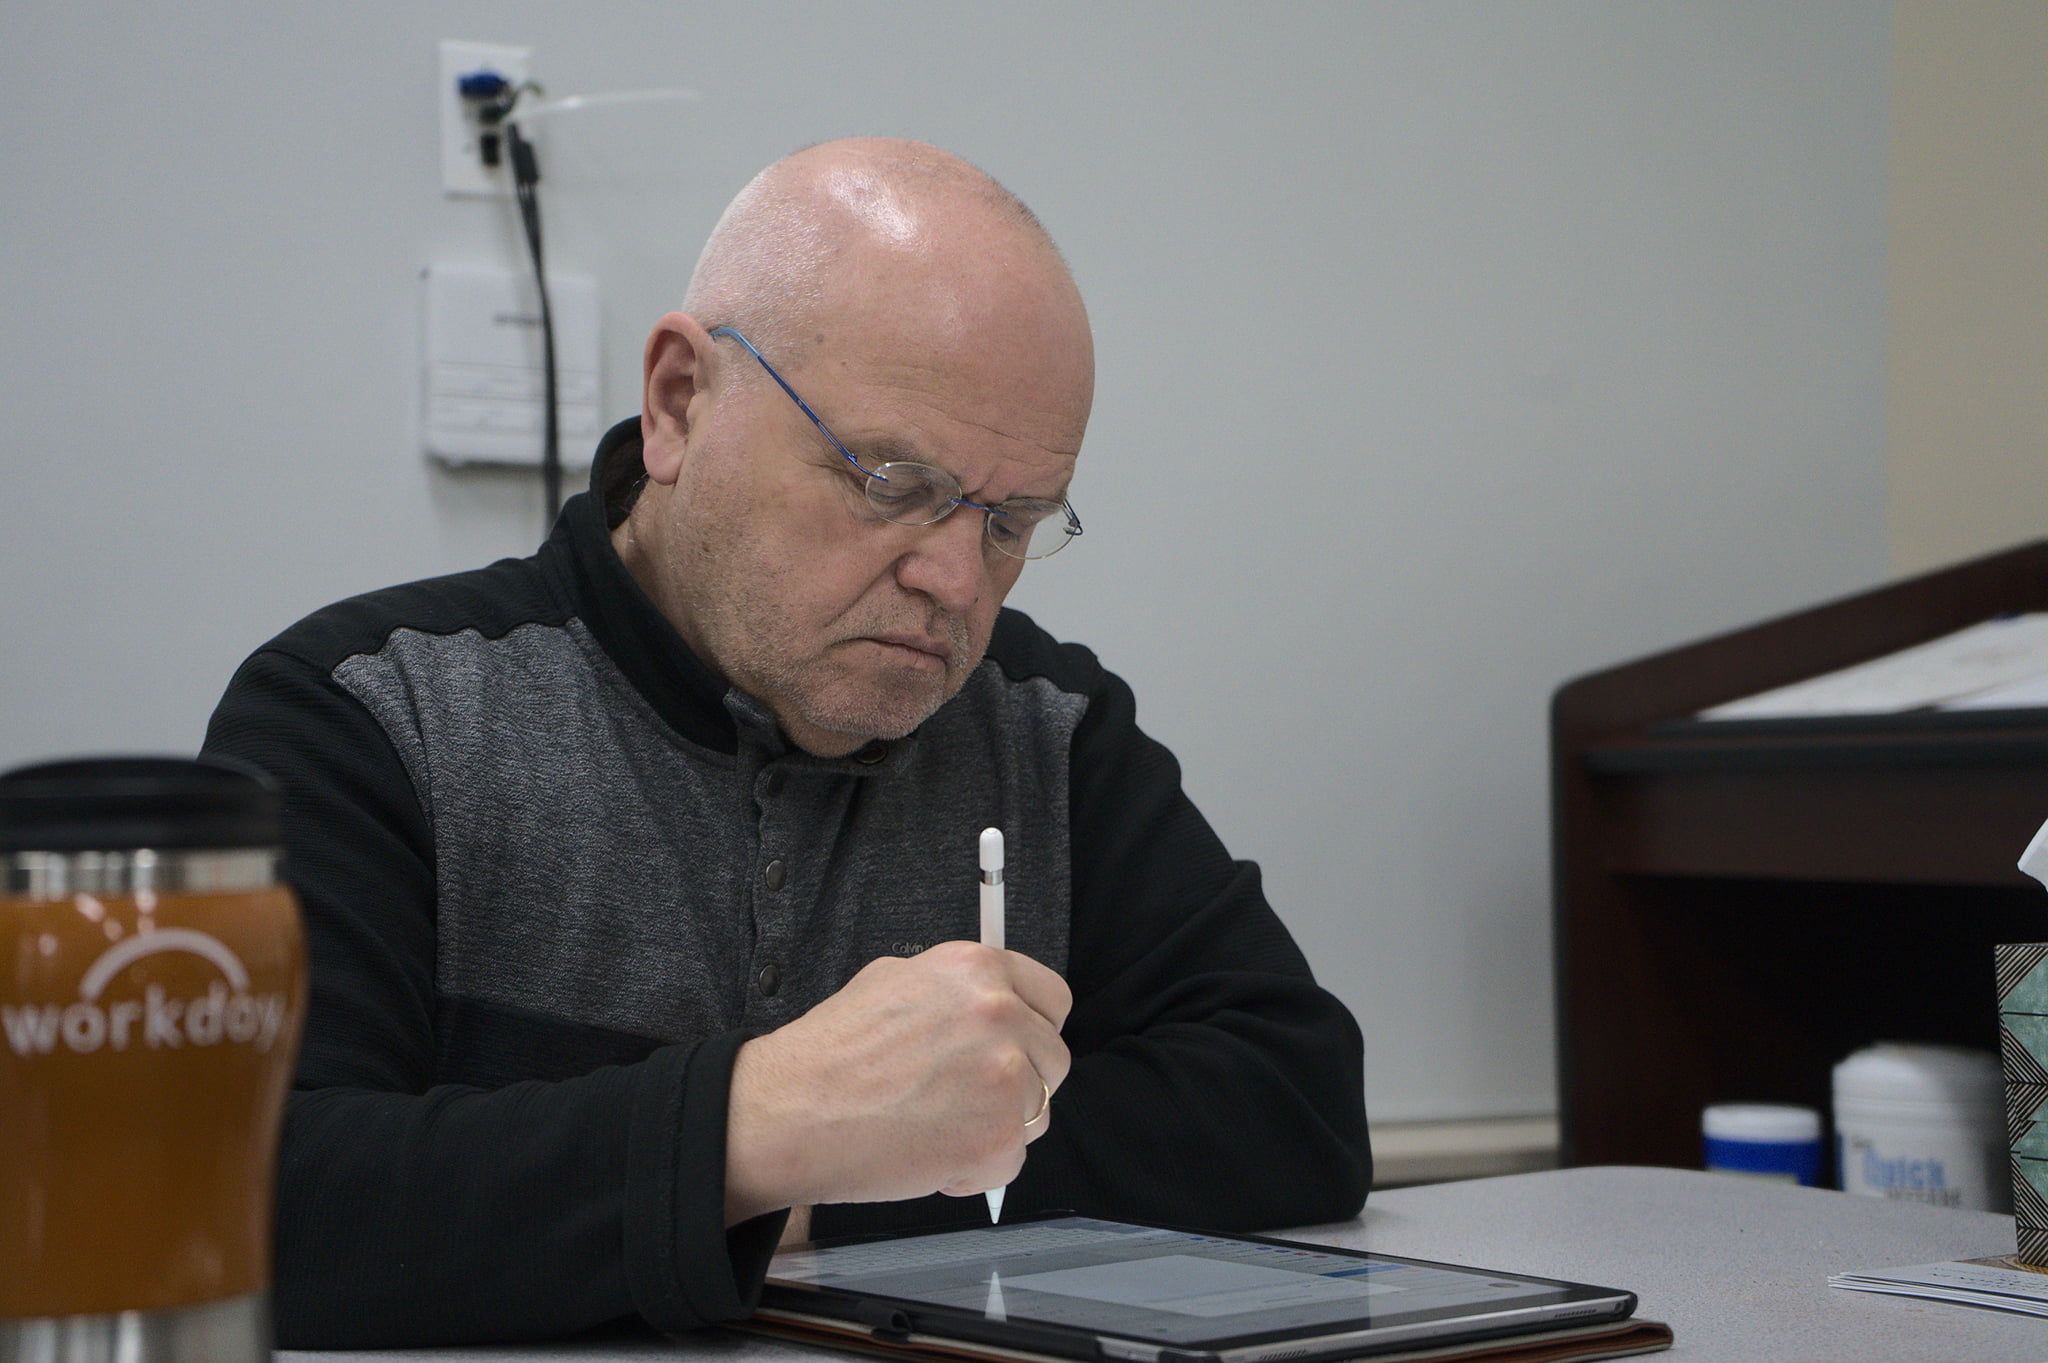 Dr Kordis works on his tablet as students complete their projects